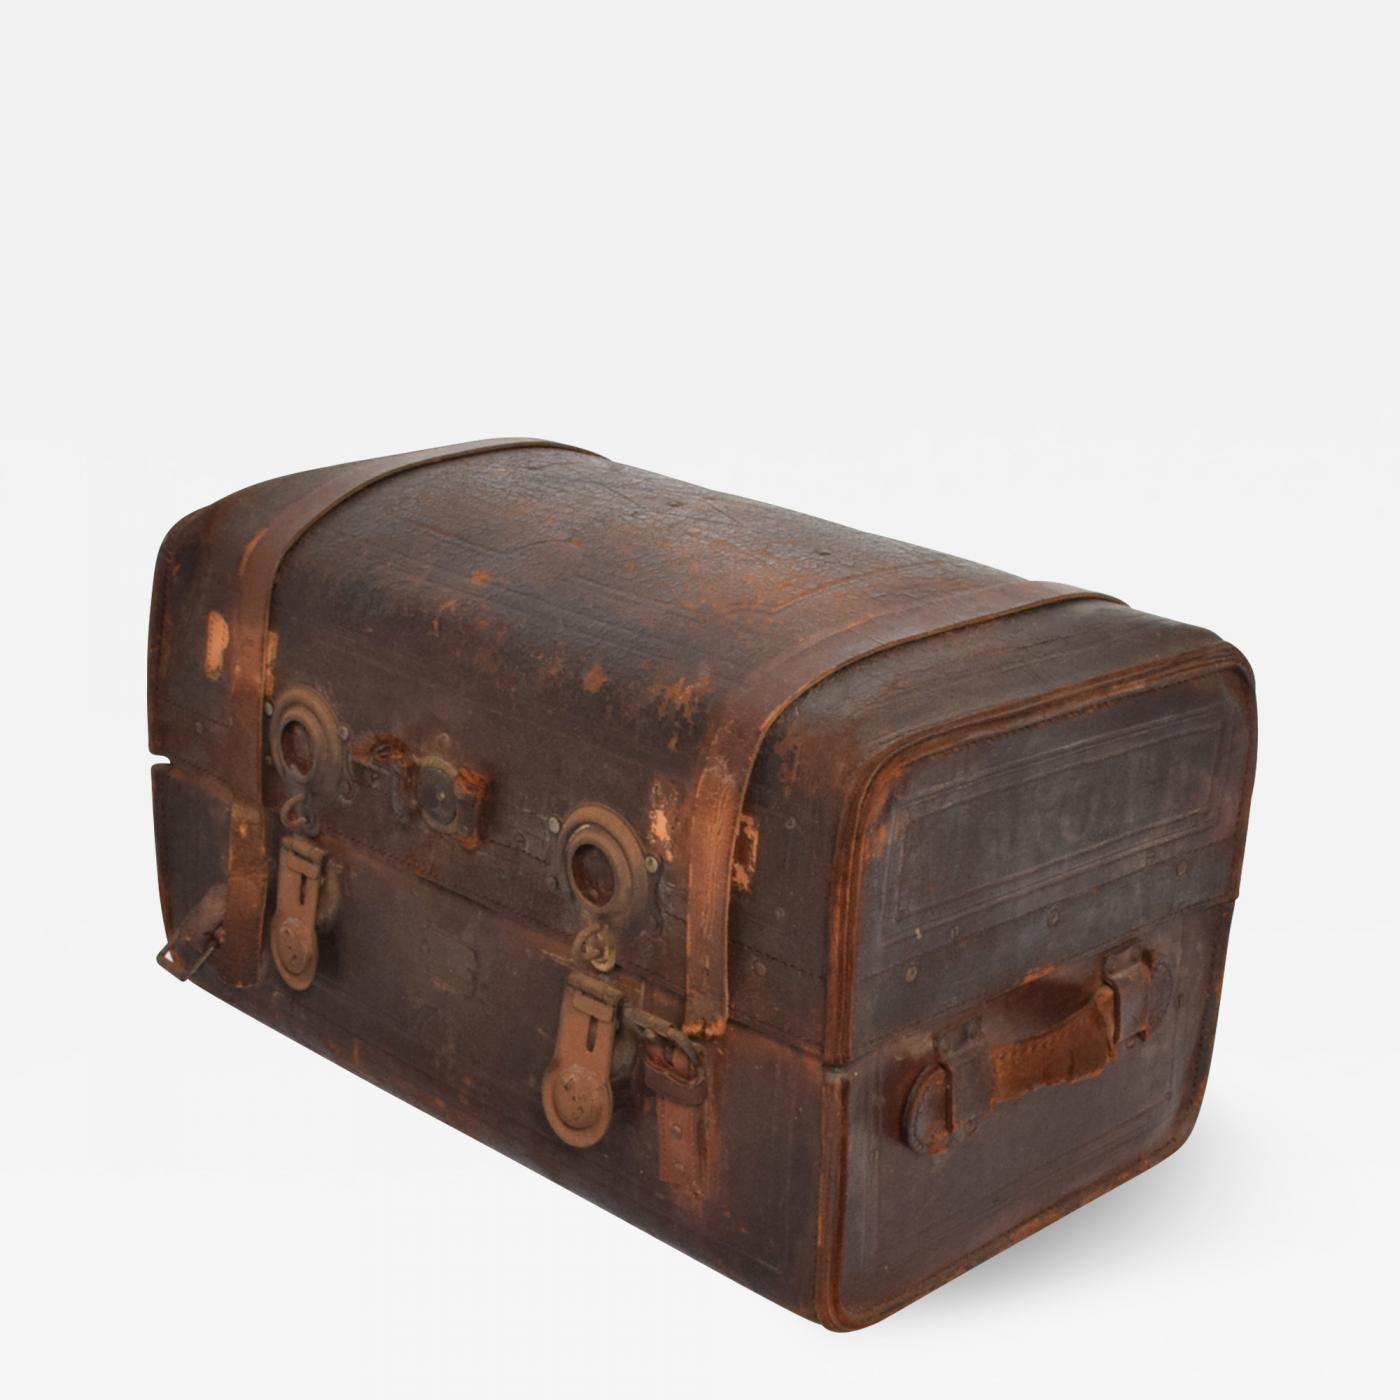 The Steamer, Leather Travel Bag